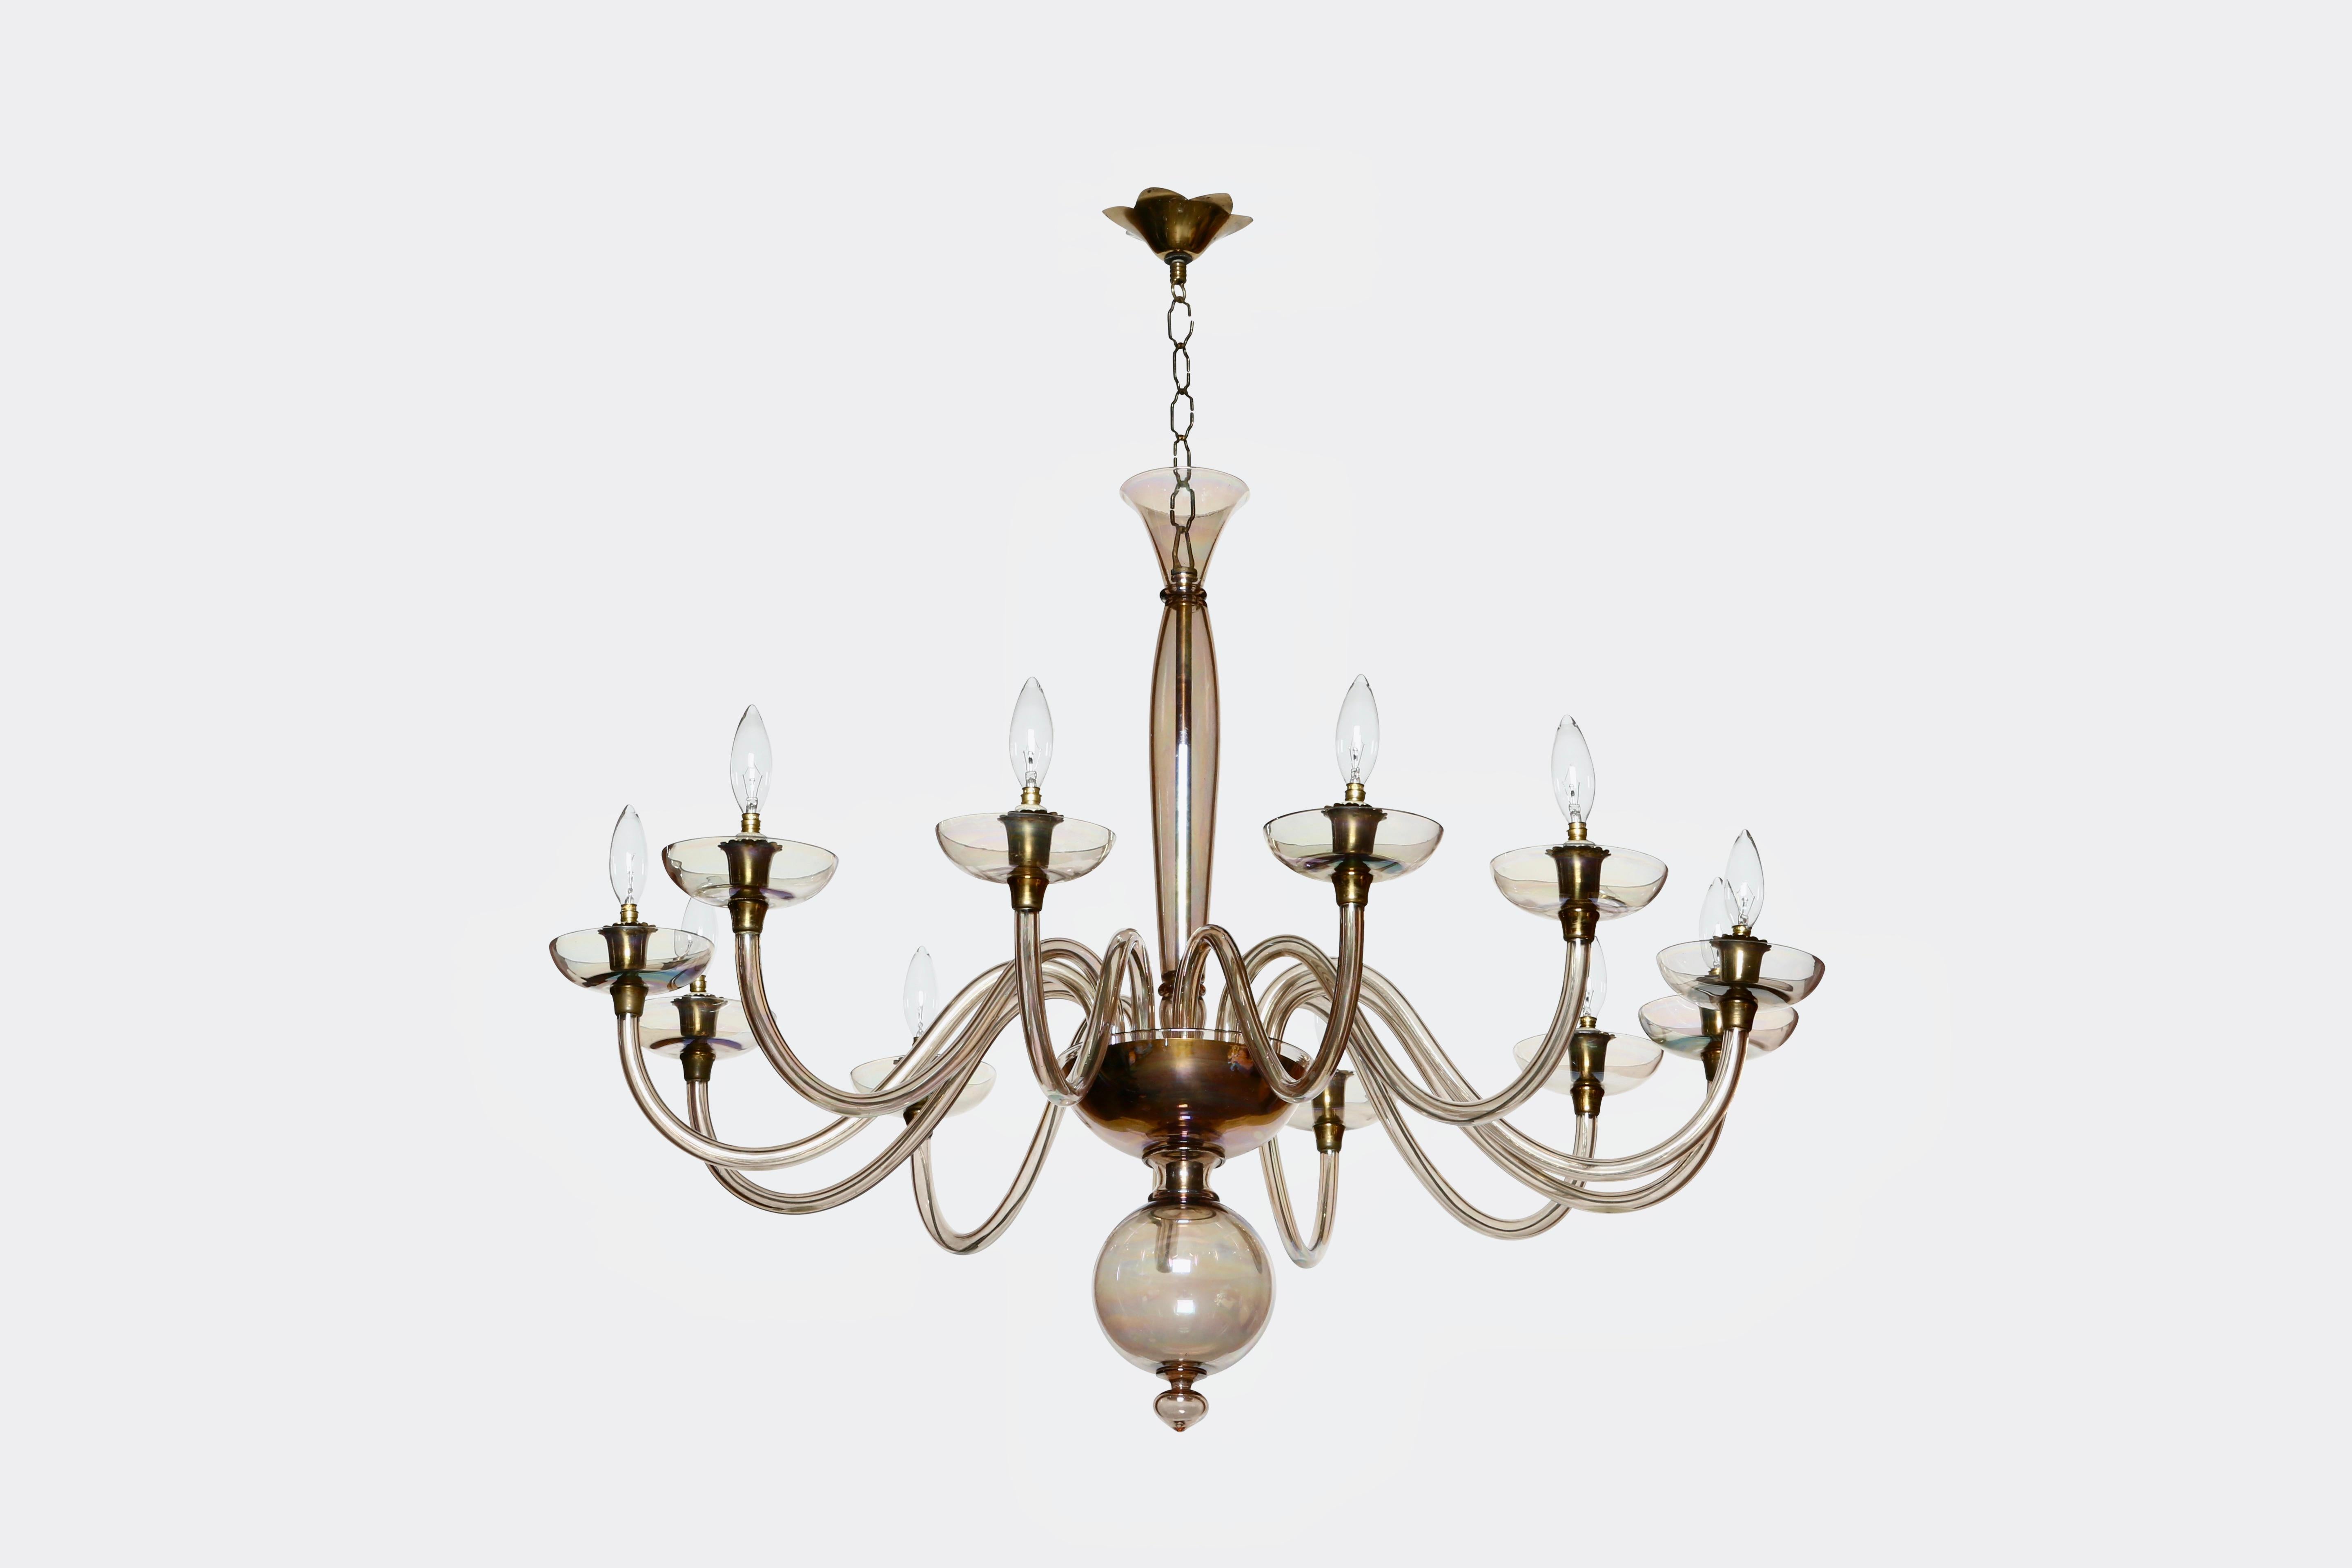 Murano glass chandelier by Pietro Toso.
Designed and made in Italy in 1950s.
Murano glass, brass
12 candelabra sockets.
Complimentary US rewiring upon request.

We take pride in bringing vintage fixtures to their full glory again.
At Illustris